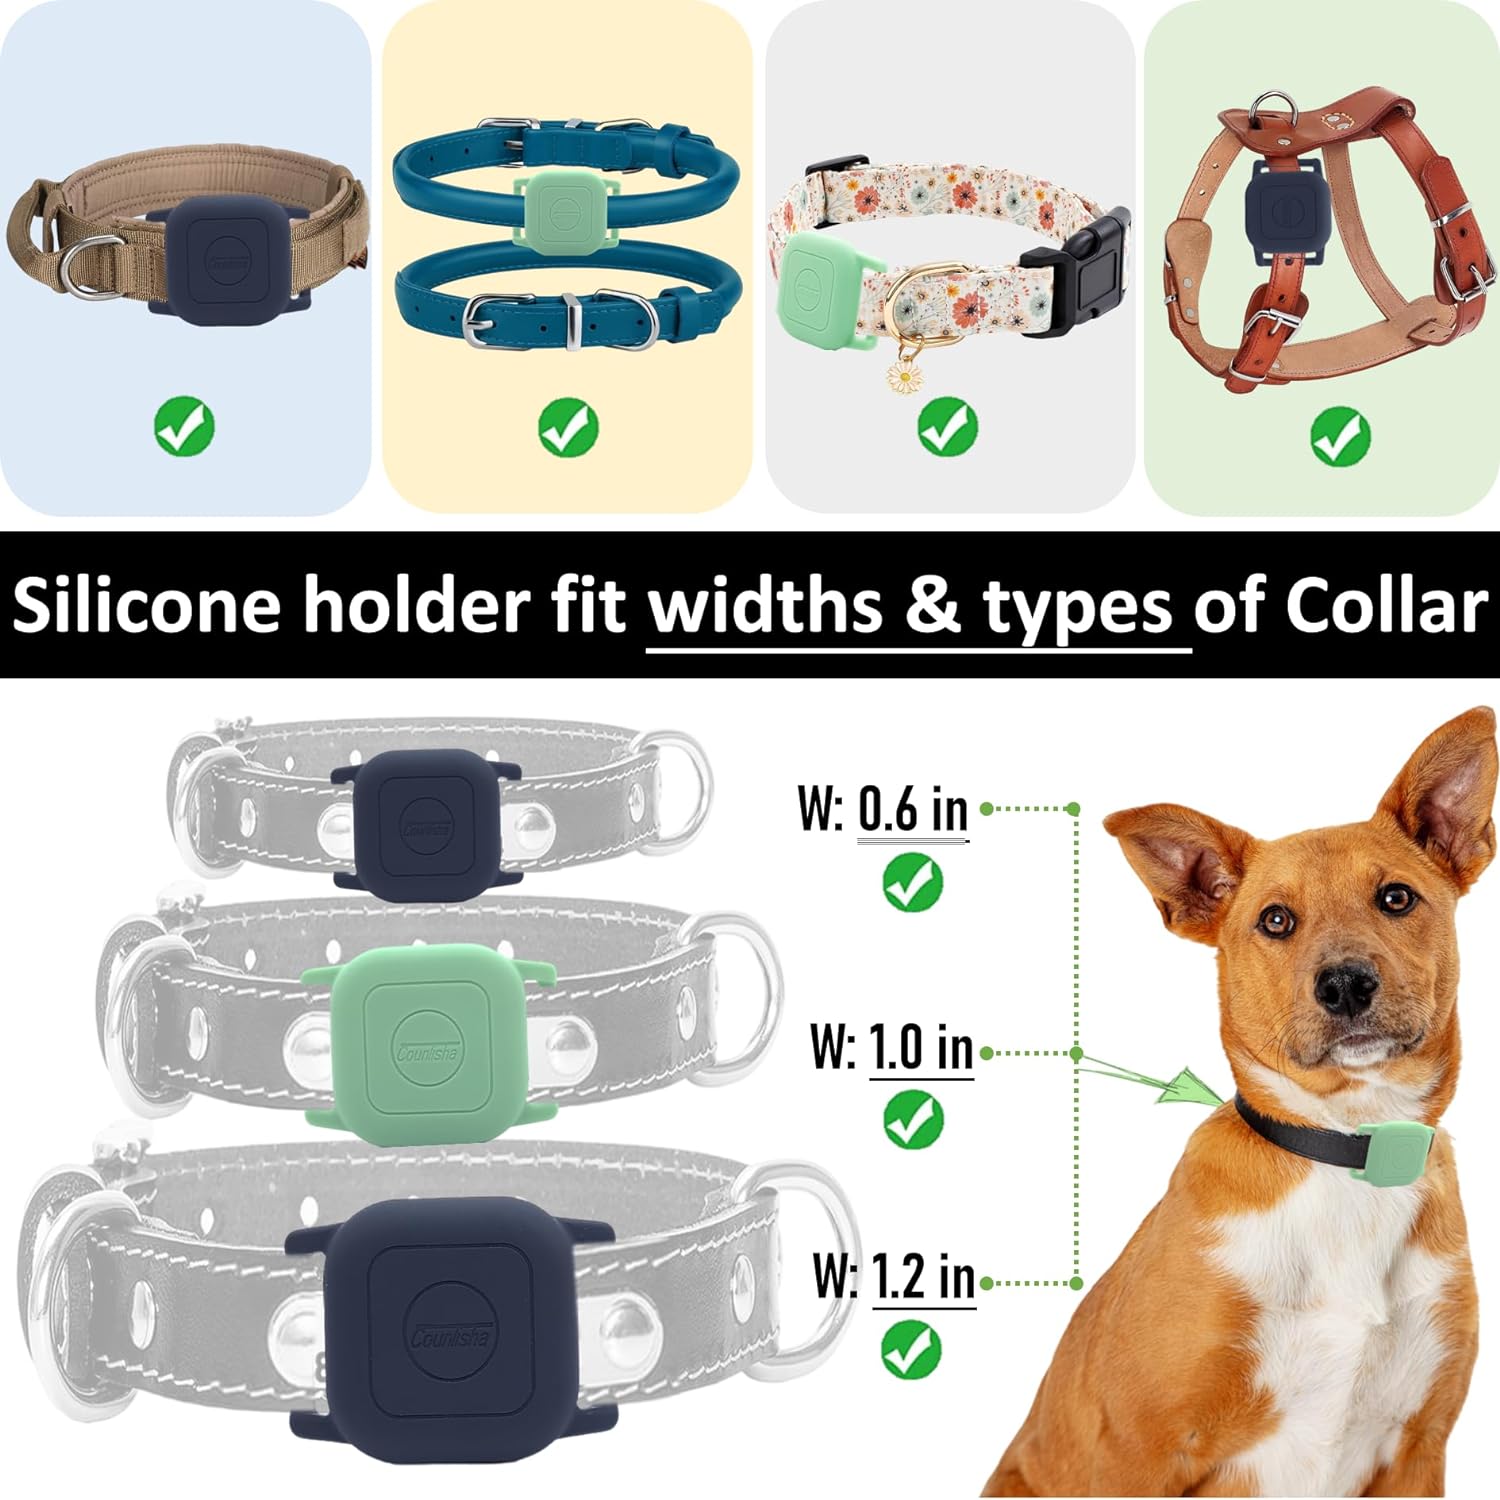 2 Pack Silicone Case for e ufy Security SmartTrack for Dog Collar, Slim Sleeve Cover Anker Finder for pet Necklace Accessories, Secure Holder for eufytag for cat Kids Bag